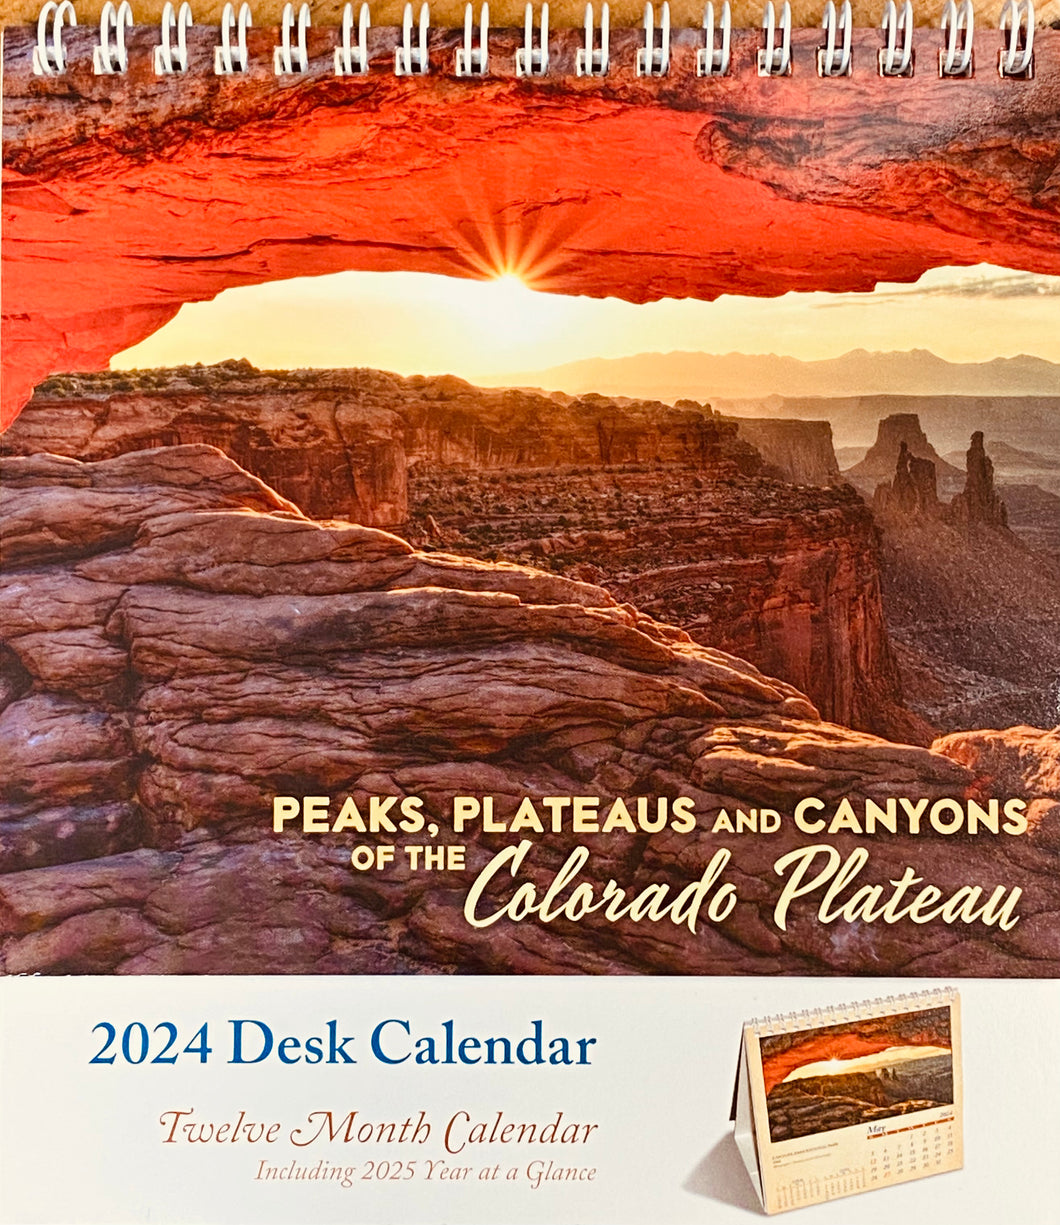 2024 Peaks, Plateaus and Canyons Desk Calendar